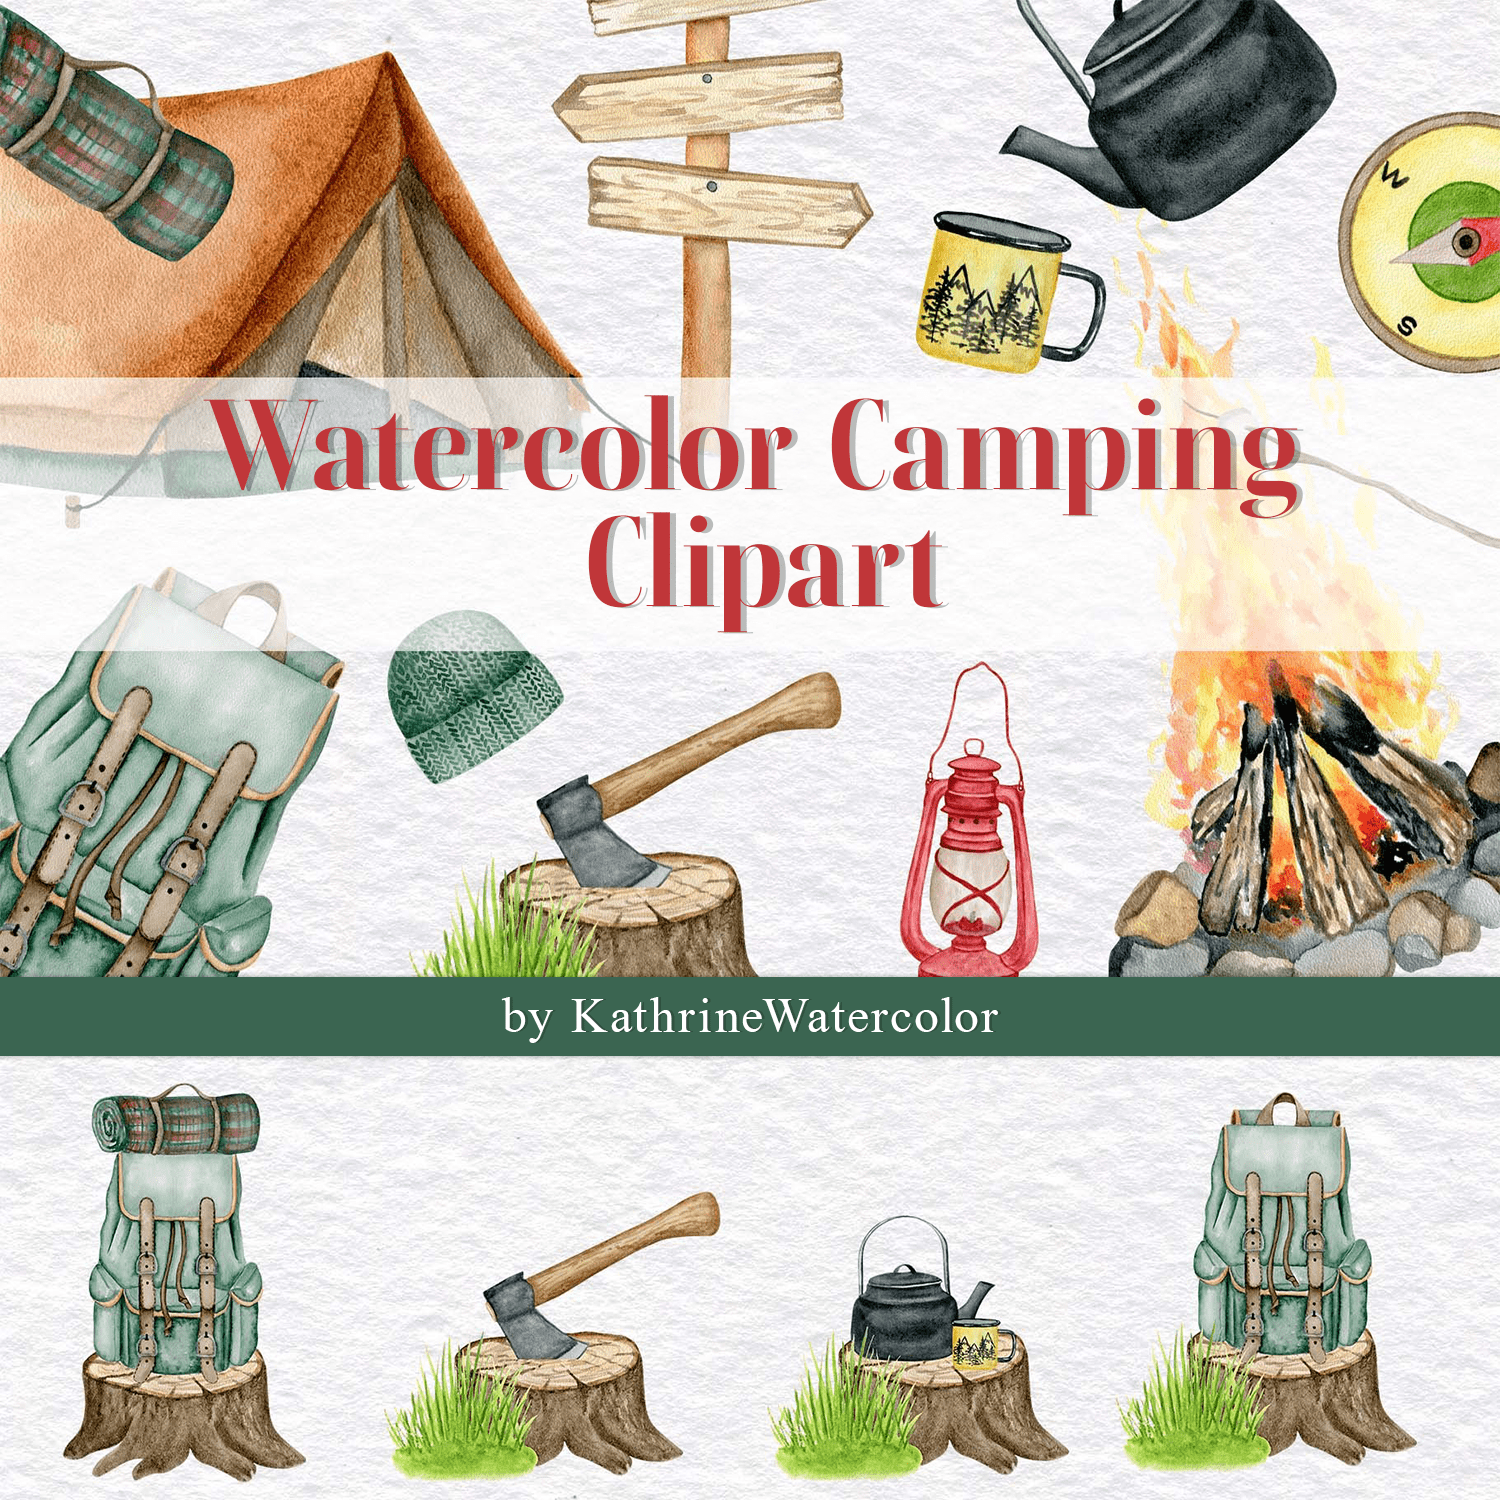 Watercolor Camping Clipart cover.